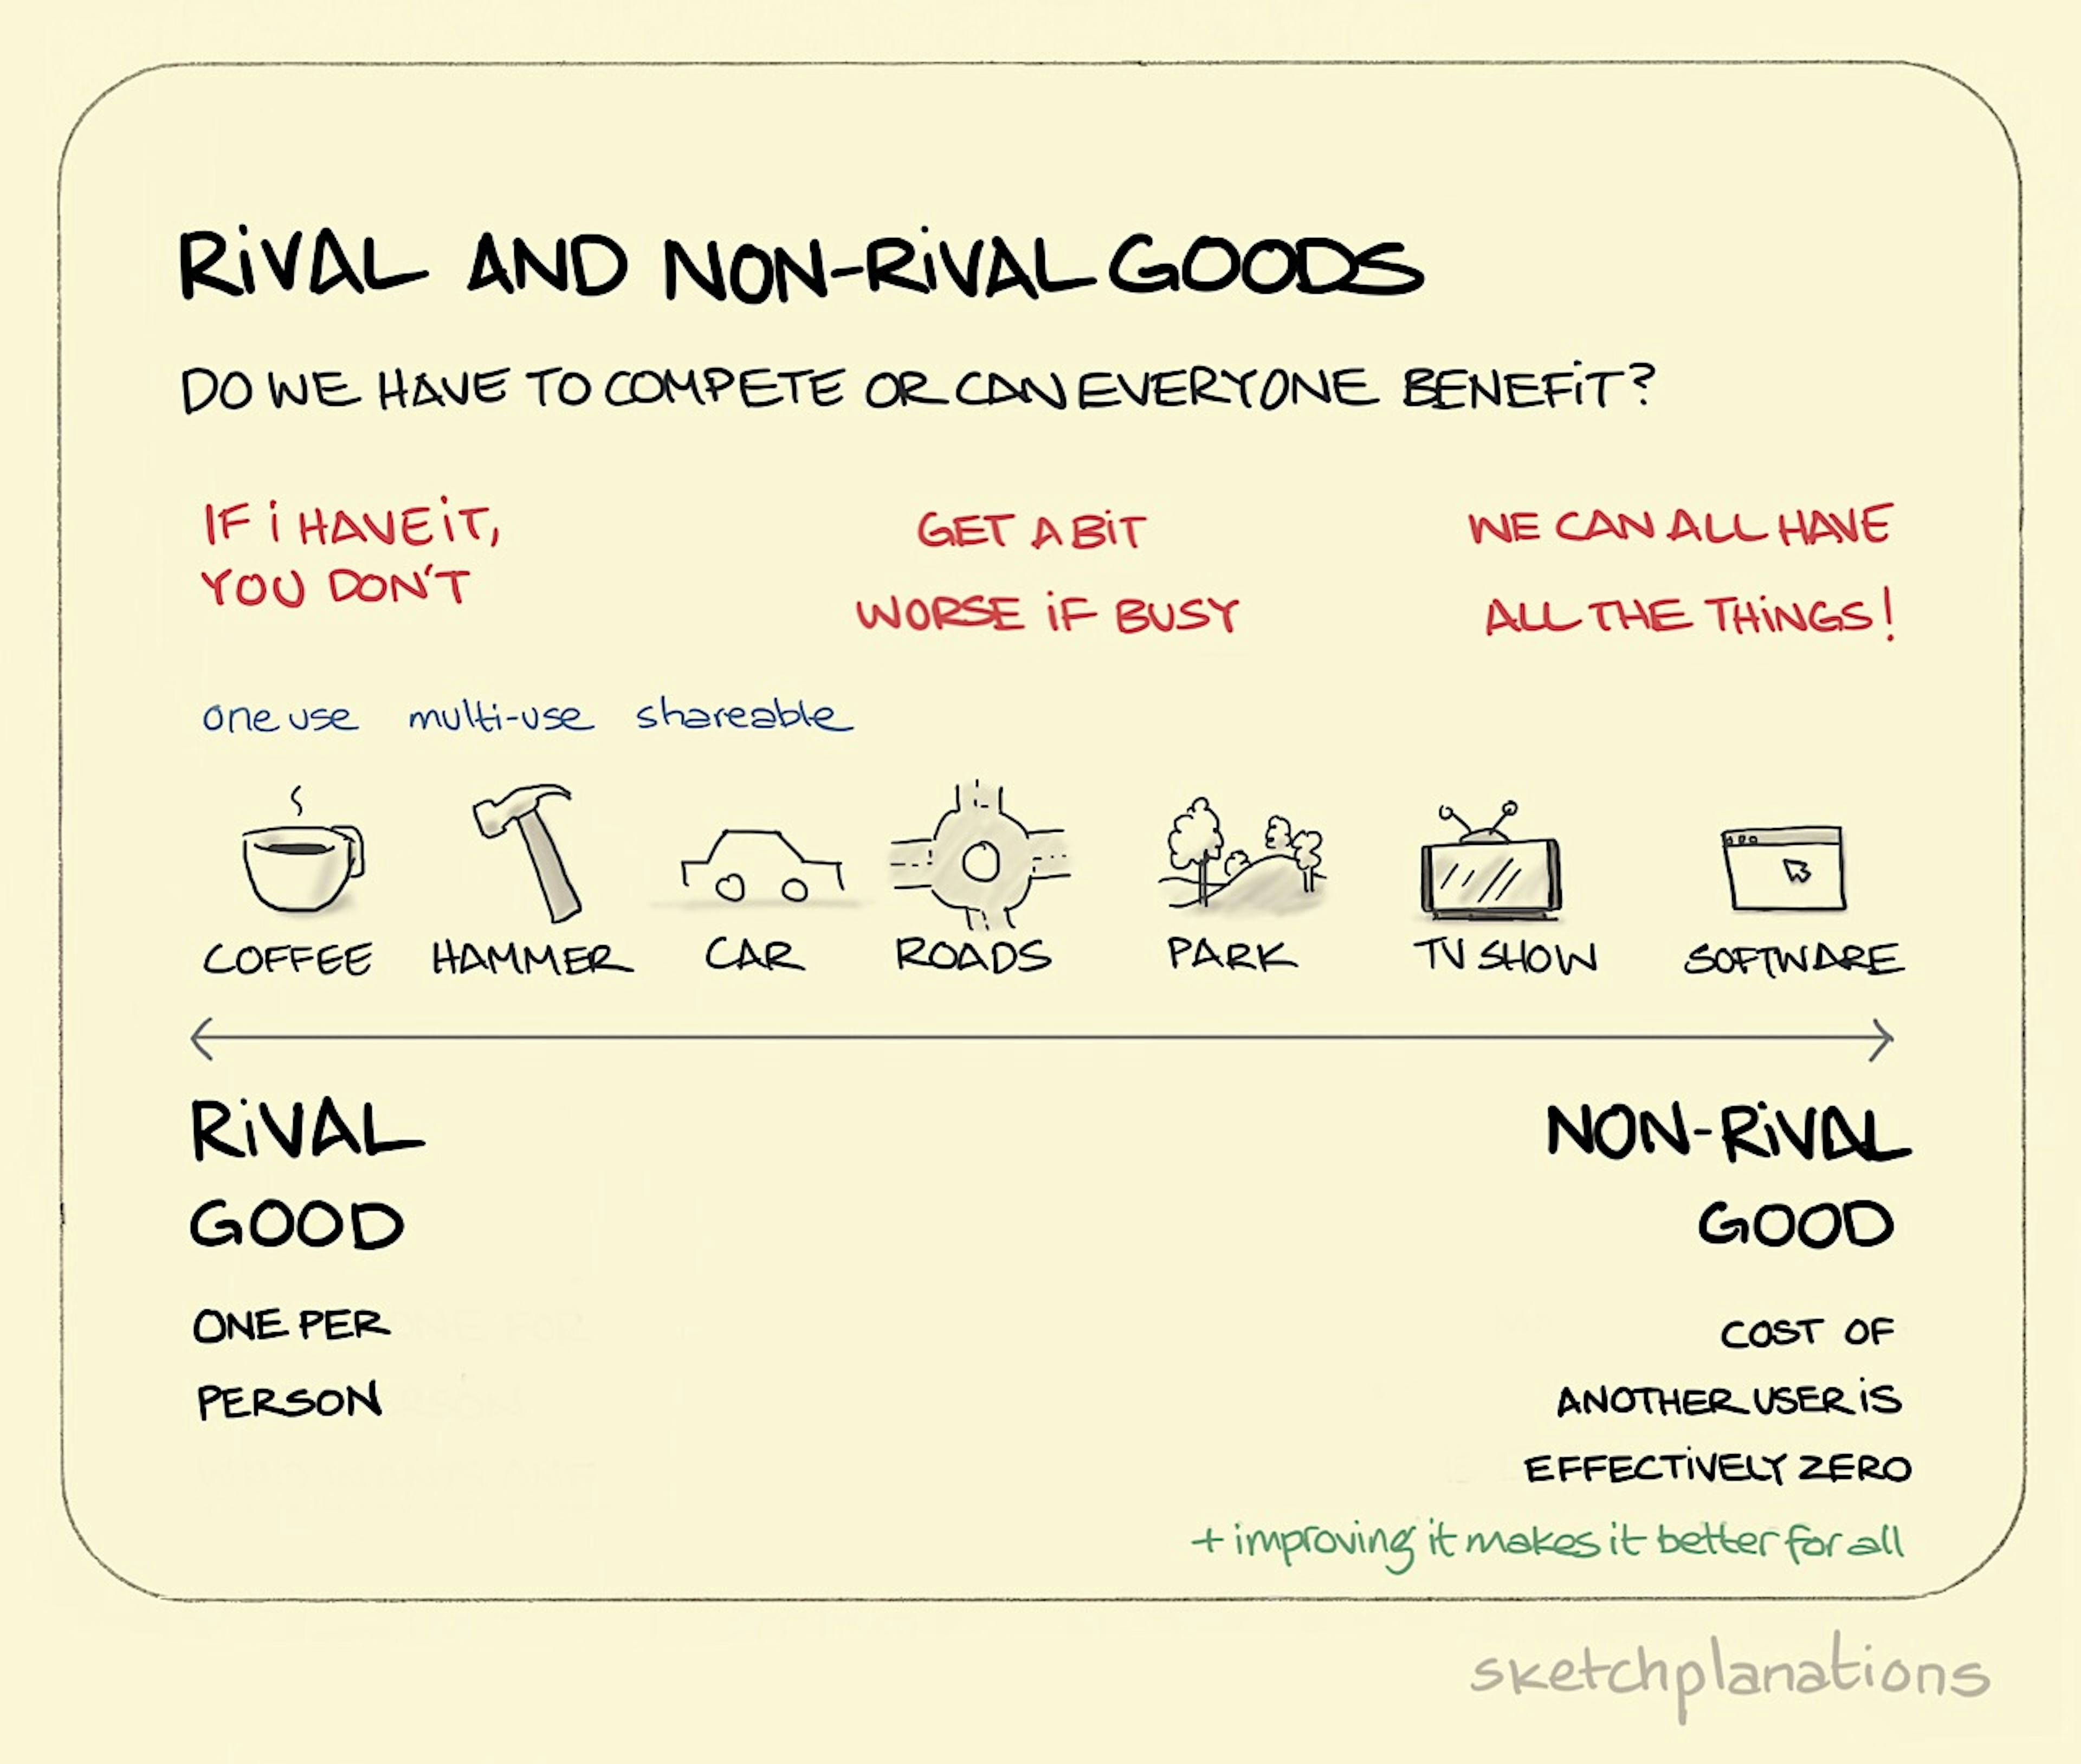 Rival and non-rival goods illustration: a scale with rival goods at one end (left) and non-rival goods at the other (right) displays items at each extreme and along the scale in between. eg. (left to right) cup of coffee; roads; software. 